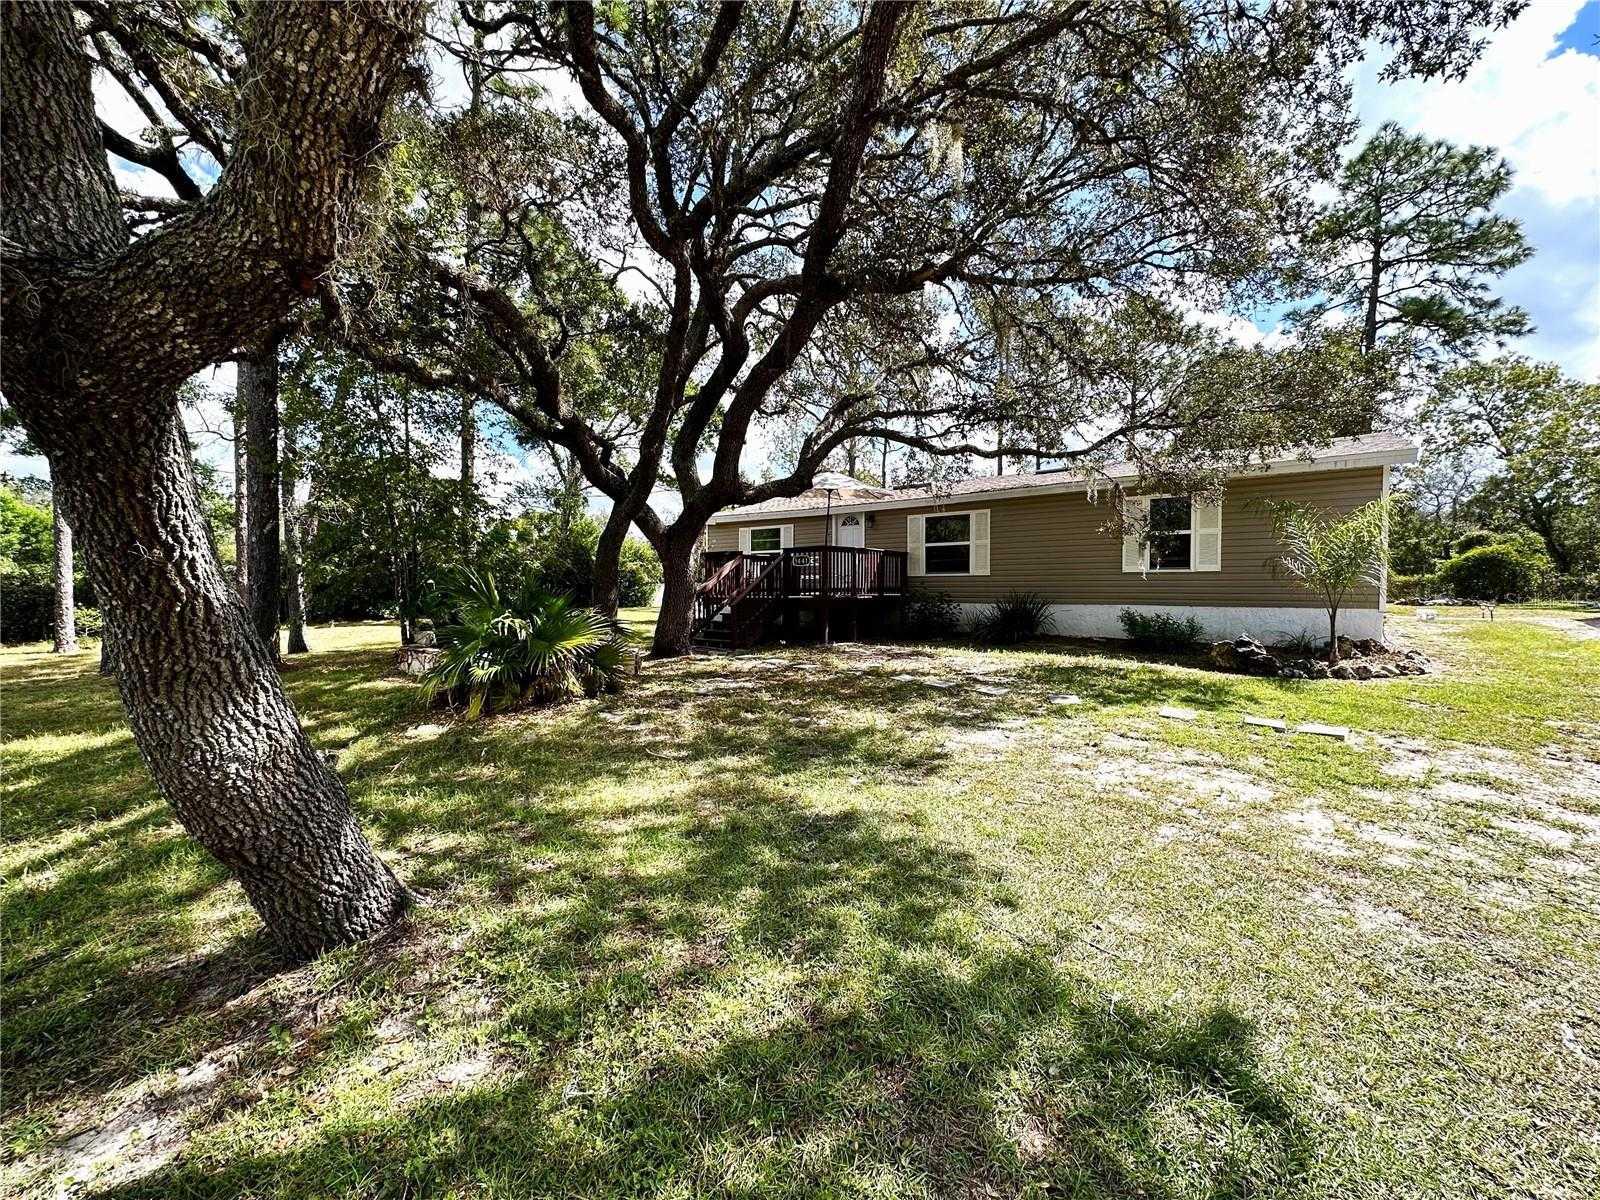 5441 WILSON, HOMOSASSA, Manufactured Home - Post 1977,  for sale, The Mount Dora Group 